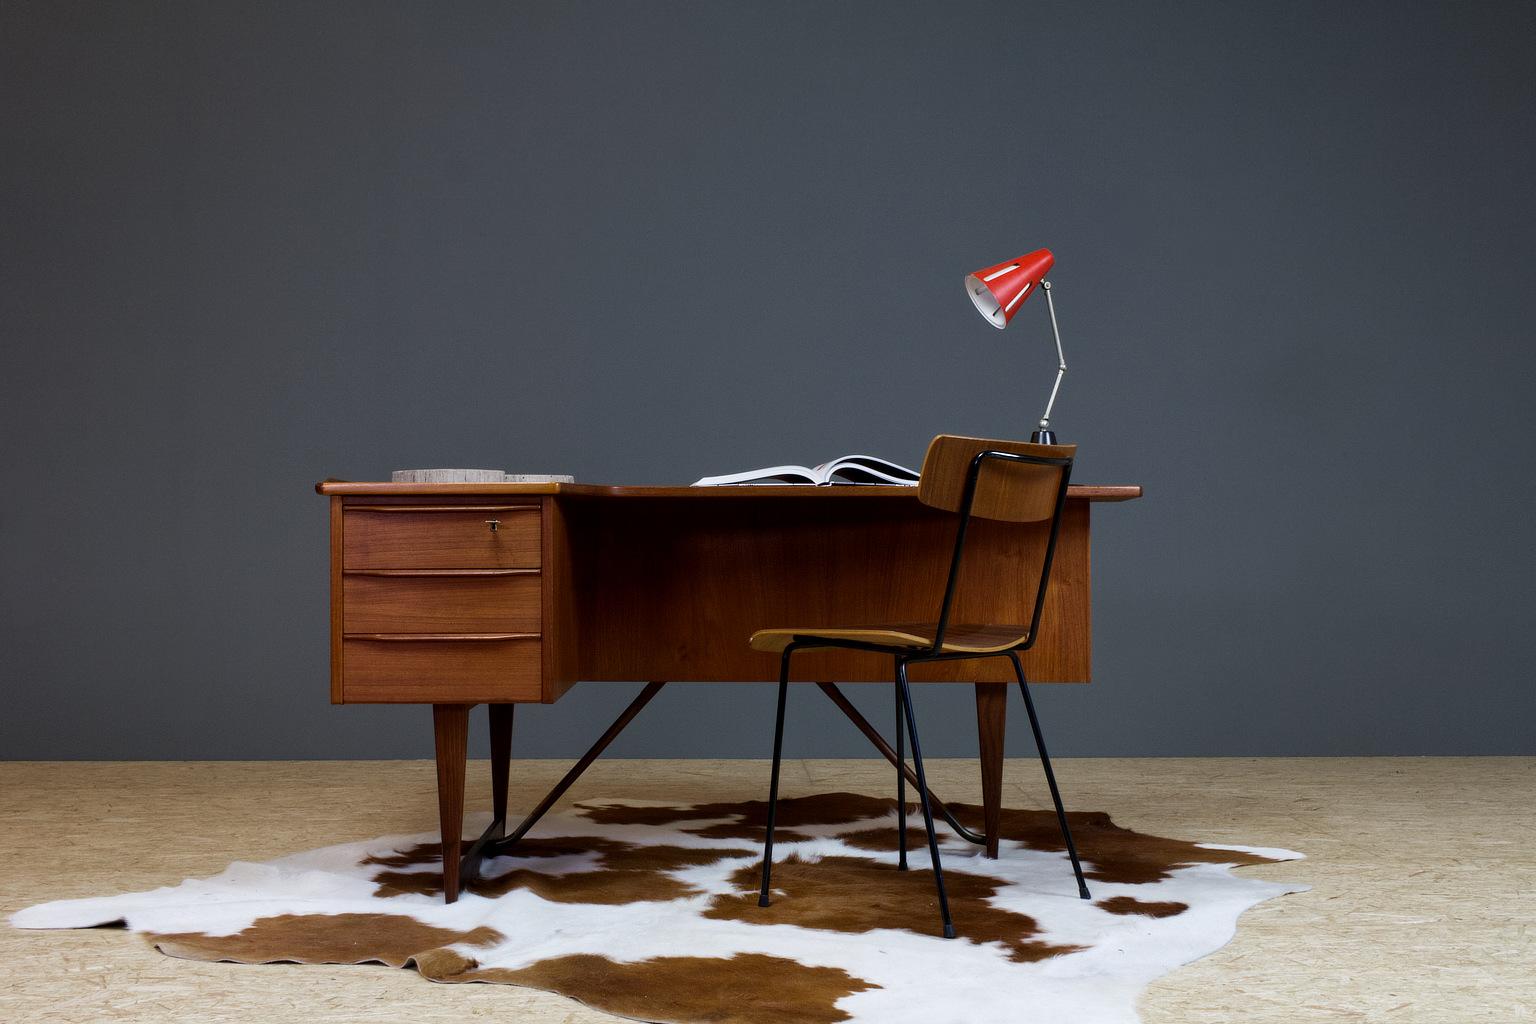 Elegant Scandinavian Modern freestanding desk in solid teak designed in 1956 by Peter Løvig Nielsen, Lovig Brand present. The desk has an extra storage compartment in the back, with a small liquor space with decorated mirror in the back, which all